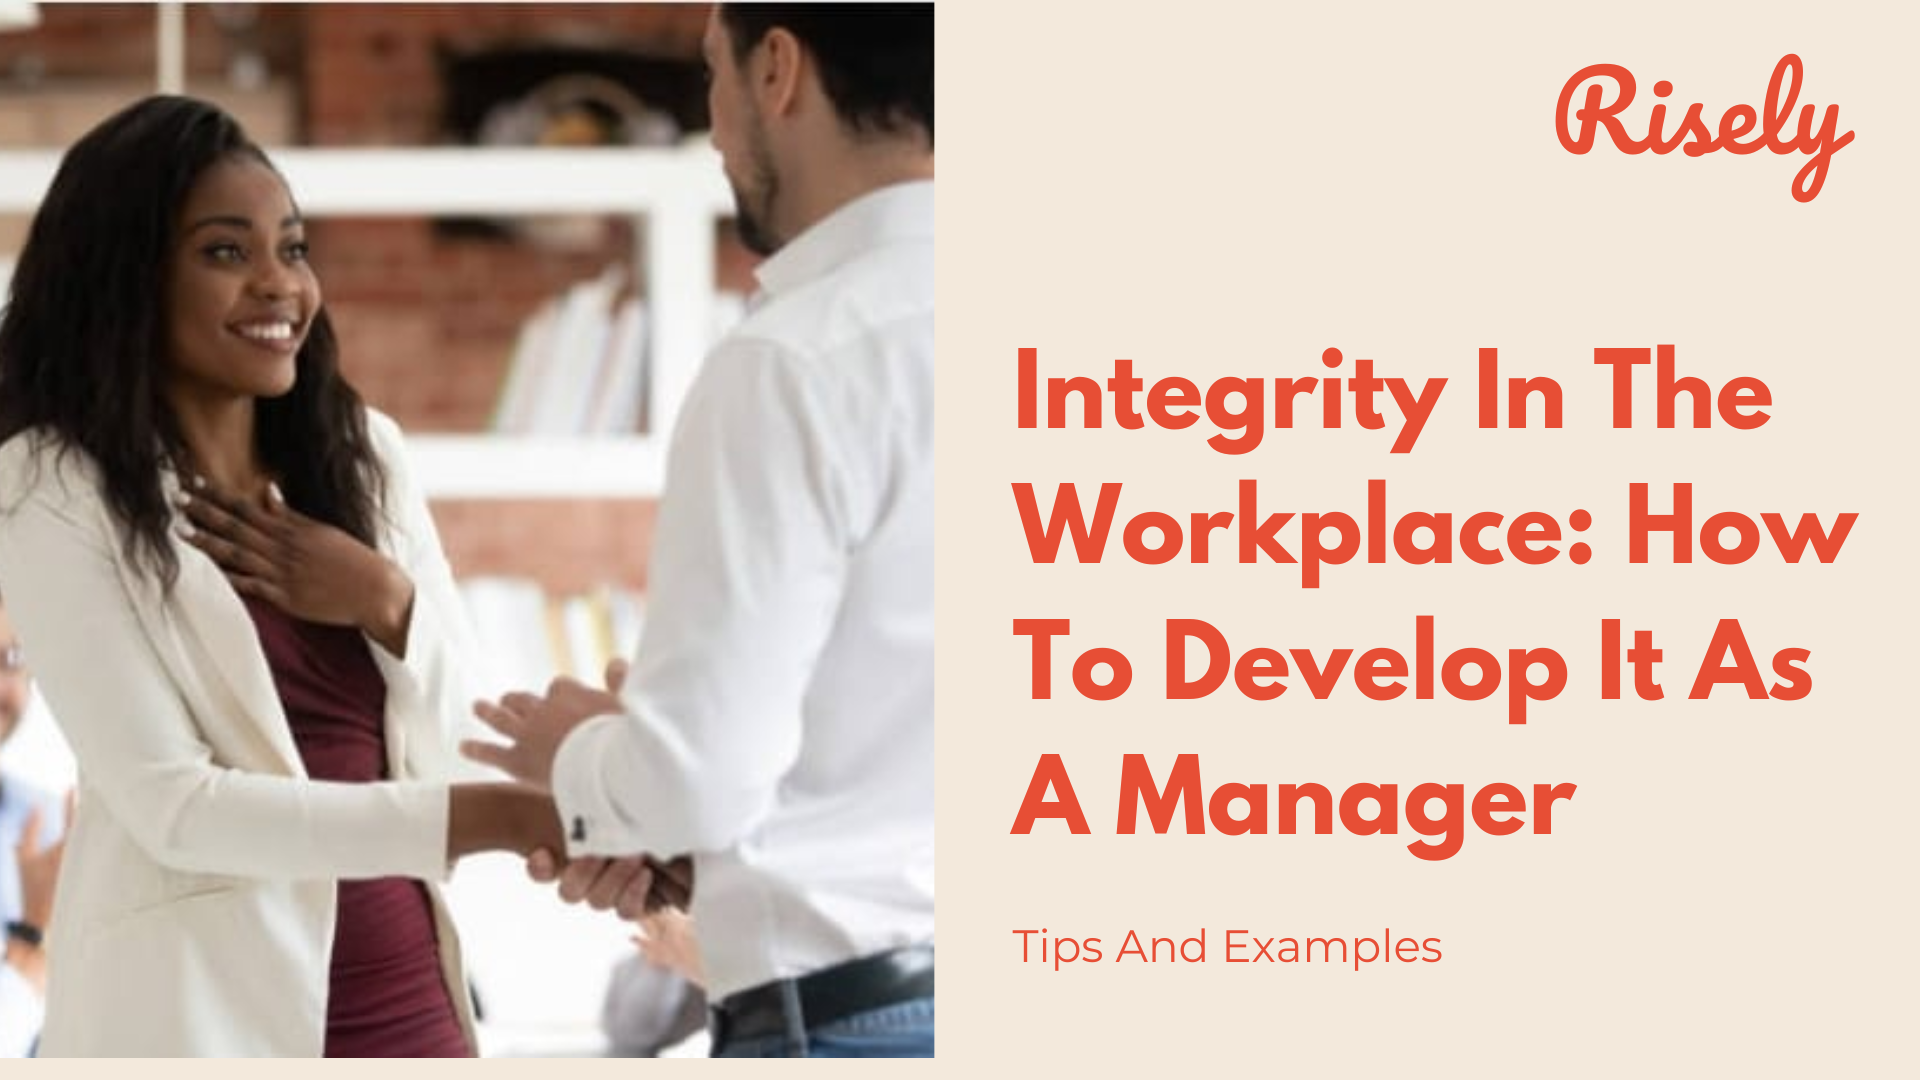 Integrity In The Workplace: How To Develop It As A Manager